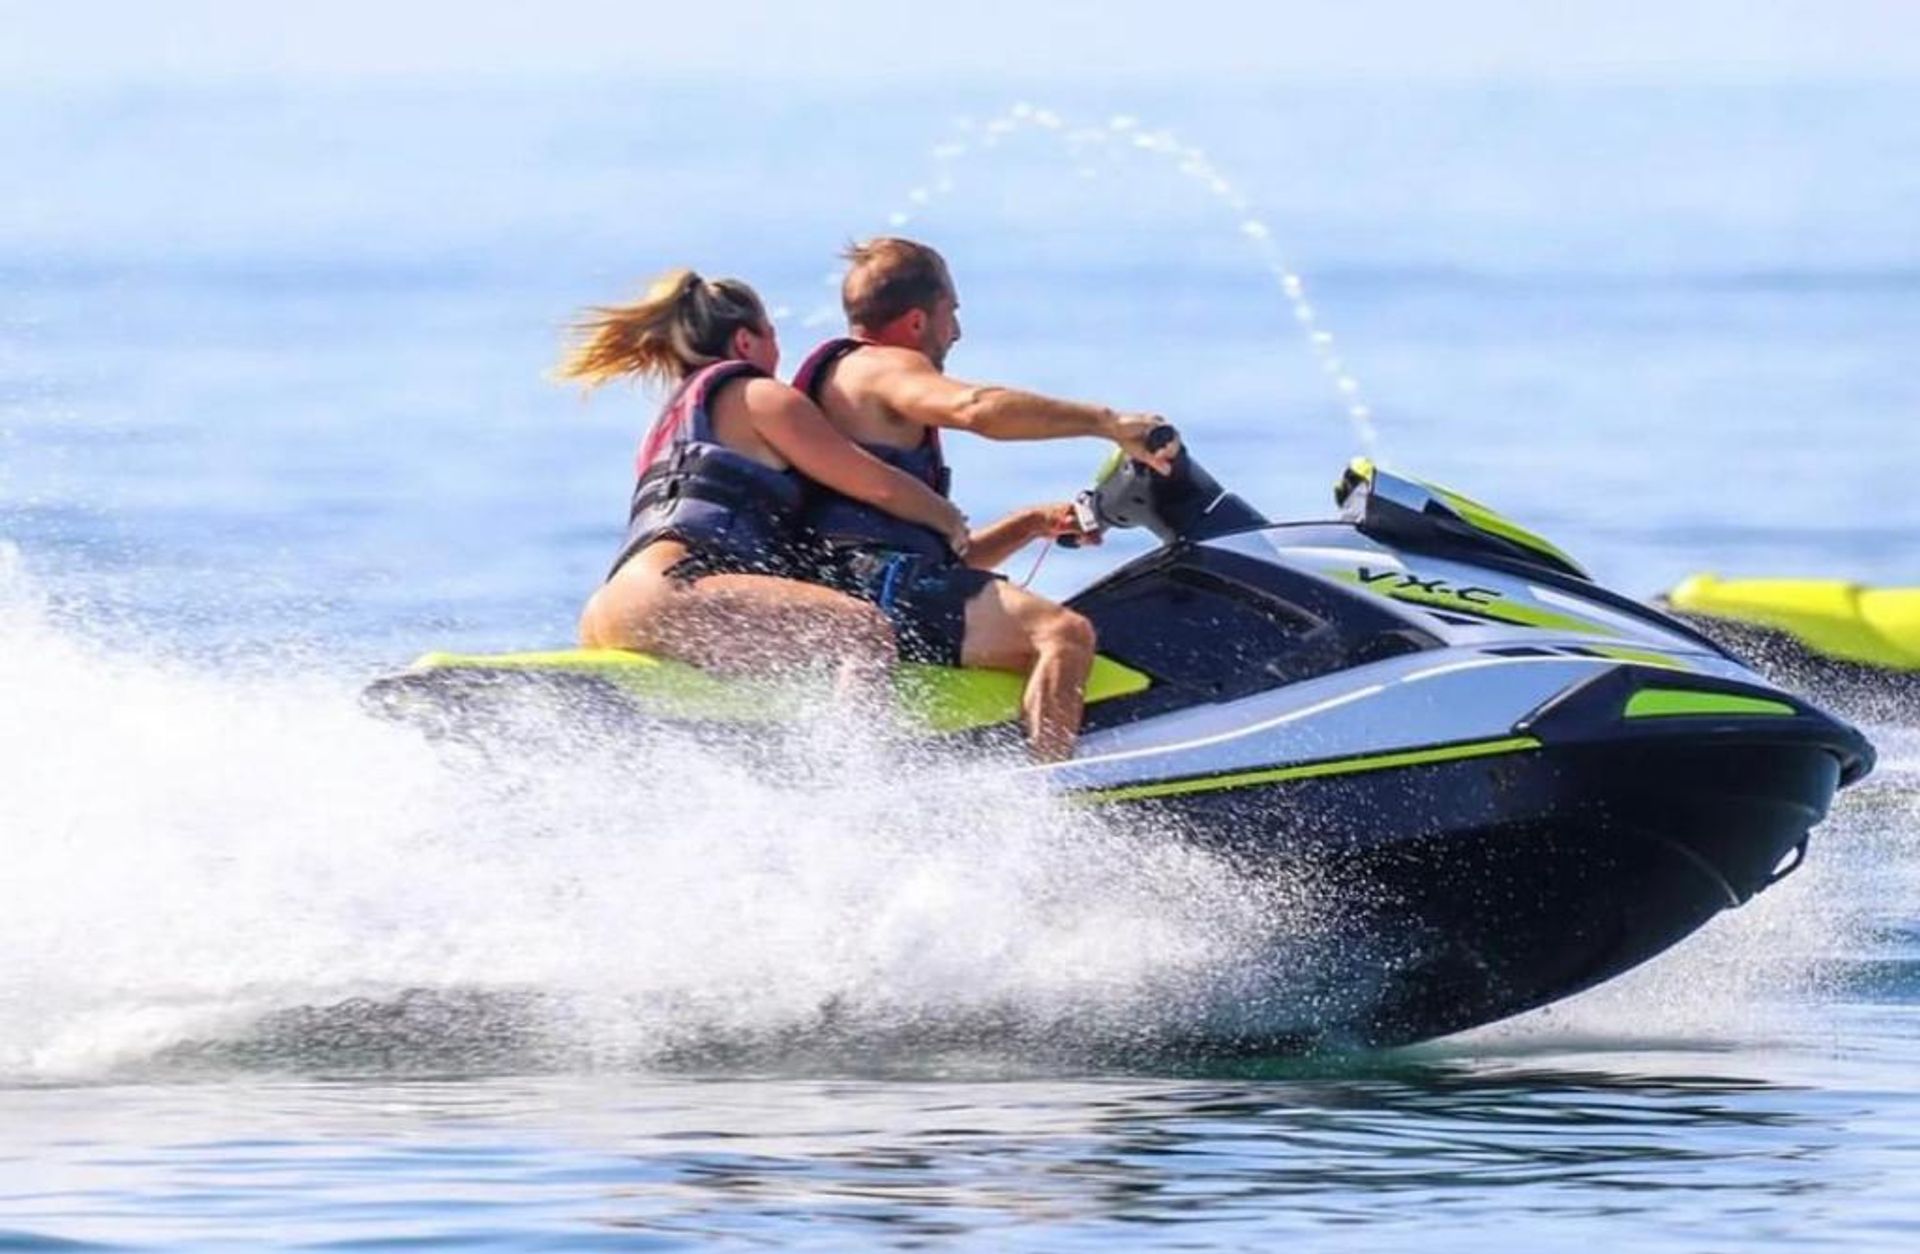 Reach Resort Island Jet Ski Adventure with Wildlife Viewing: Atlantic Ocean, Gulf of Mexico, Sand Bar, Dolphins, and More image 2